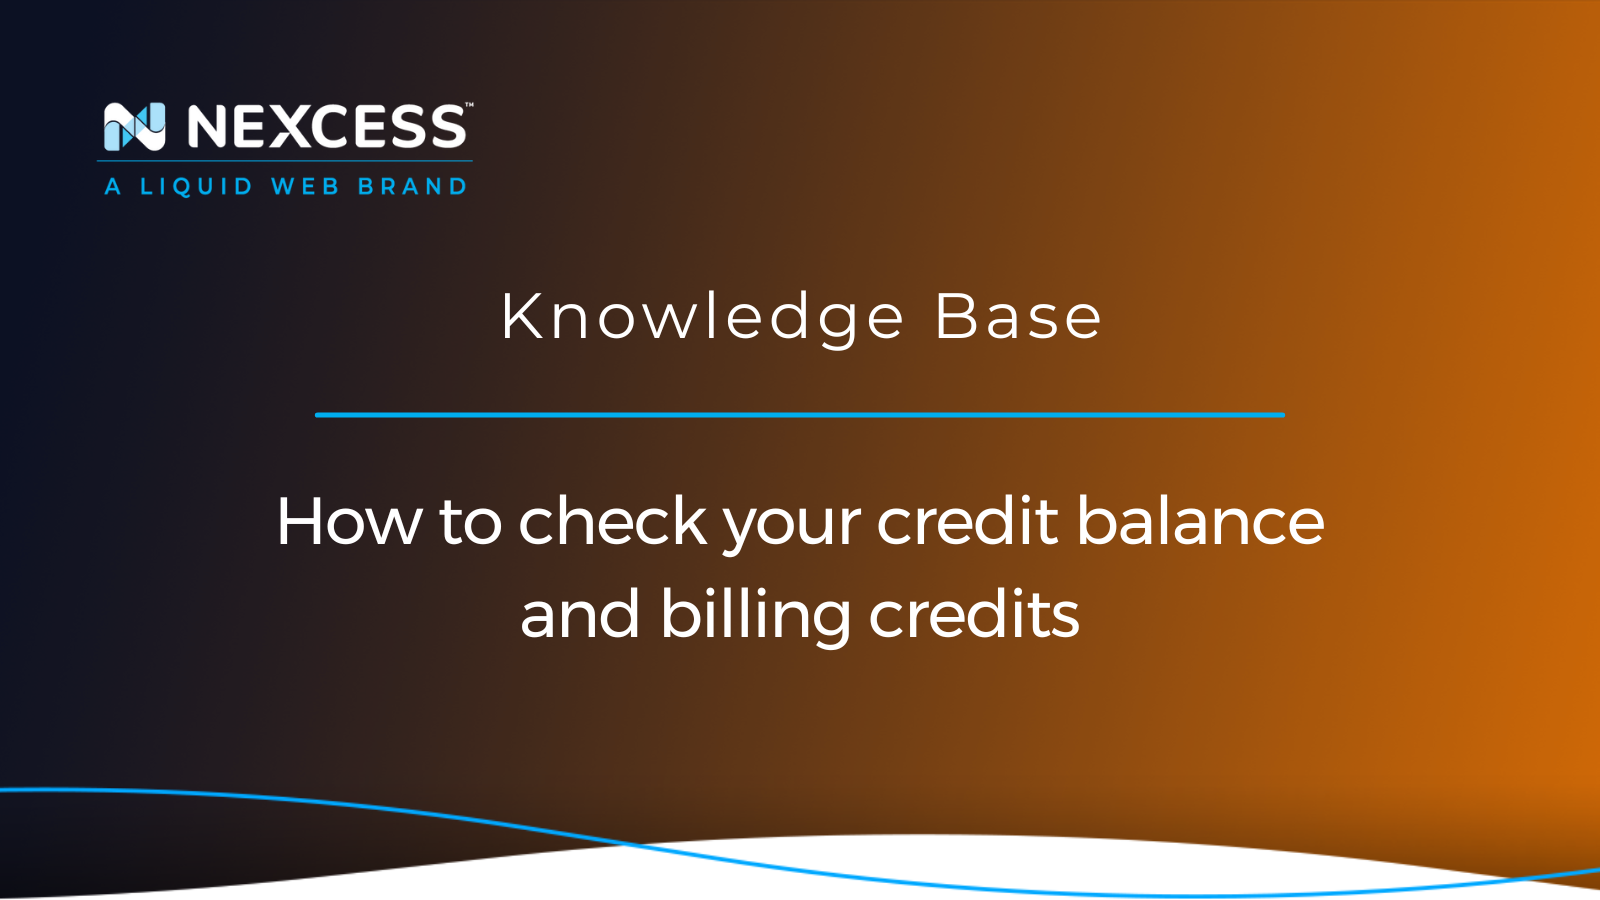 How to check your credit balance and billing credits